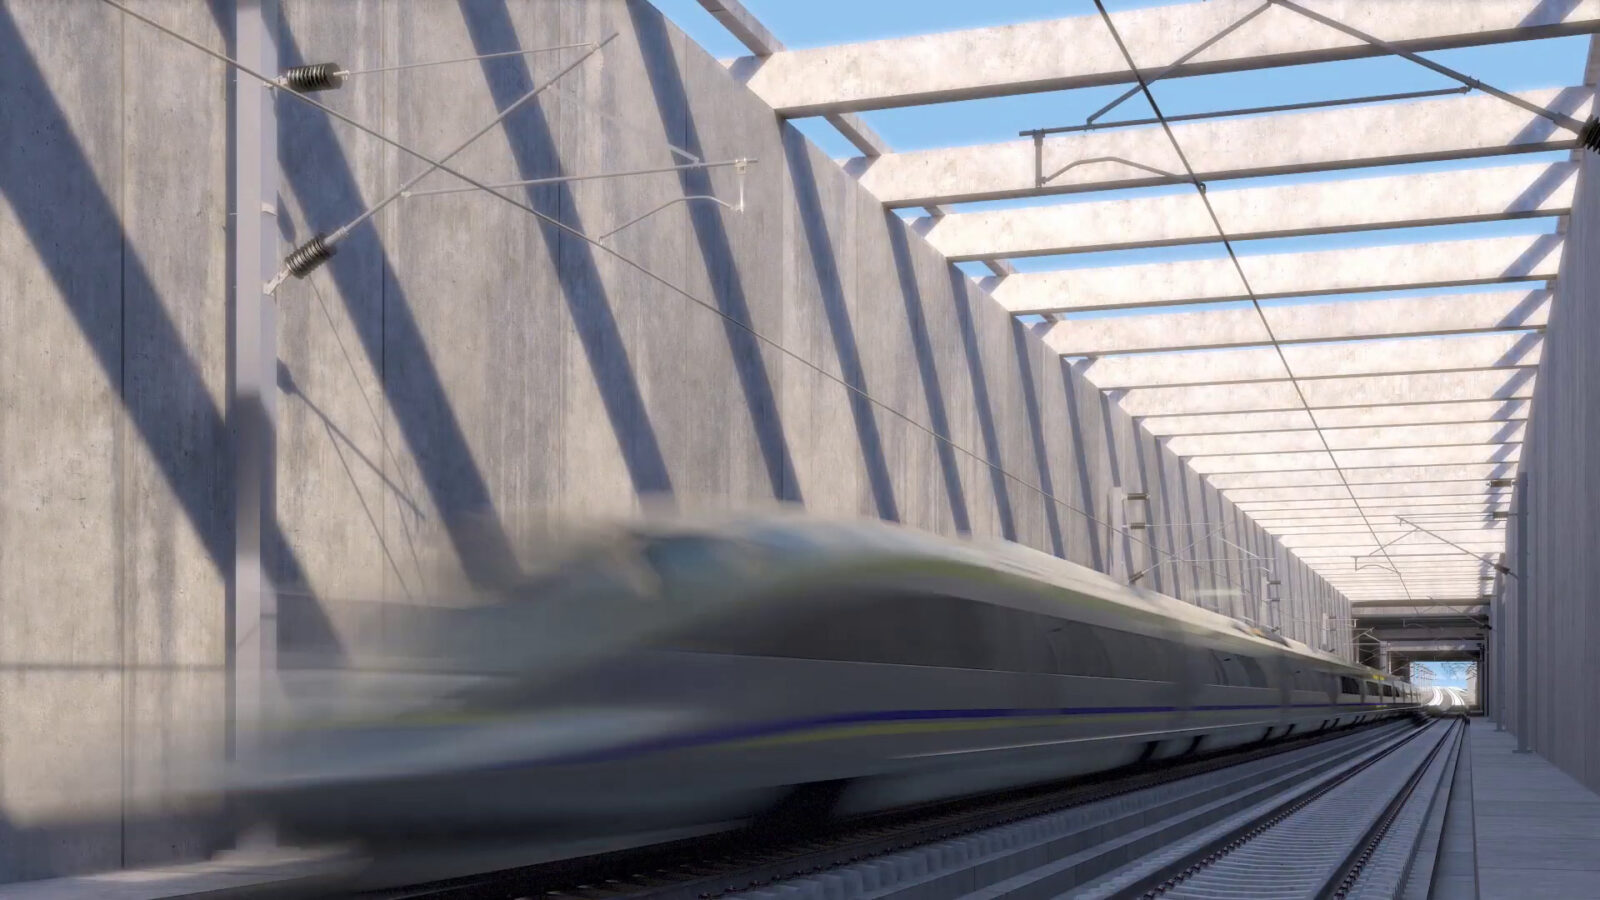 How to build high-speed rail?  Start thinking “inside the box”